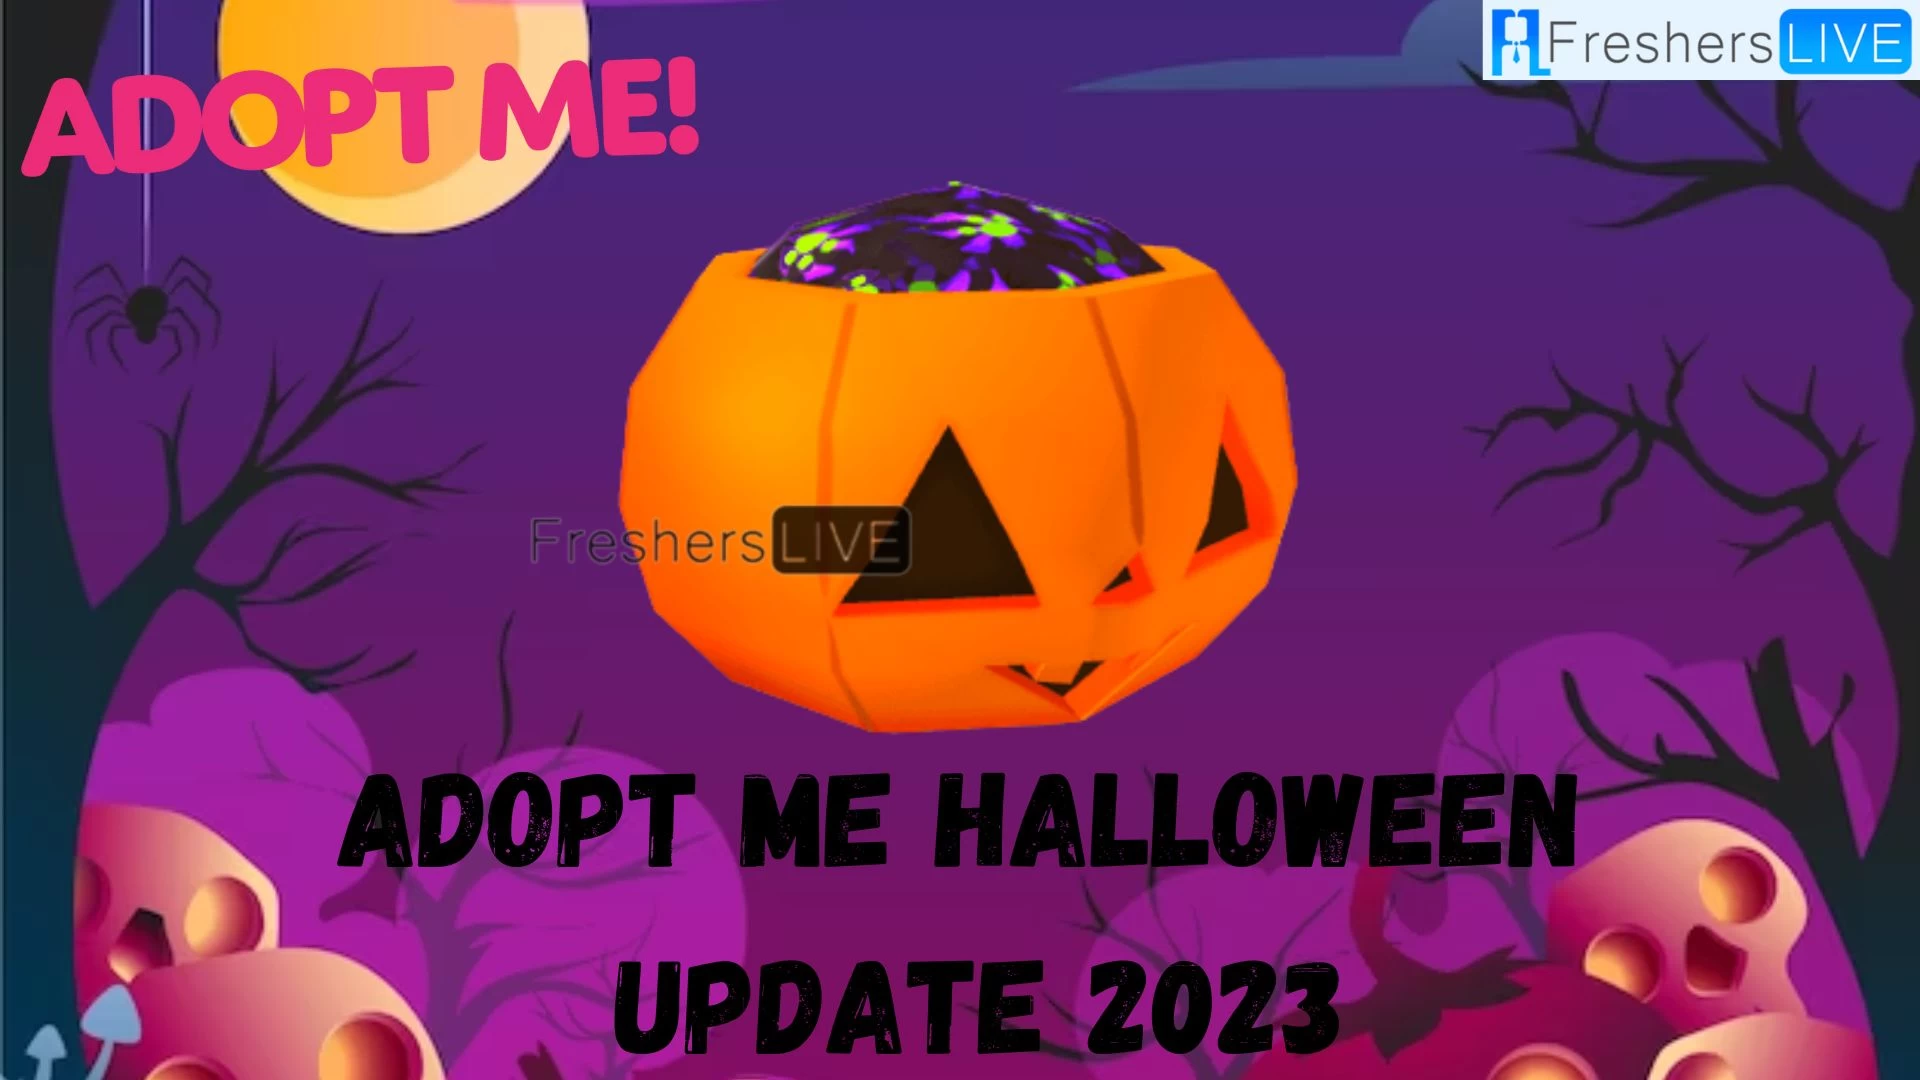 Adopt Me Halloween Update 2023, When Is The Halloween Update For Adopt Me 2023?